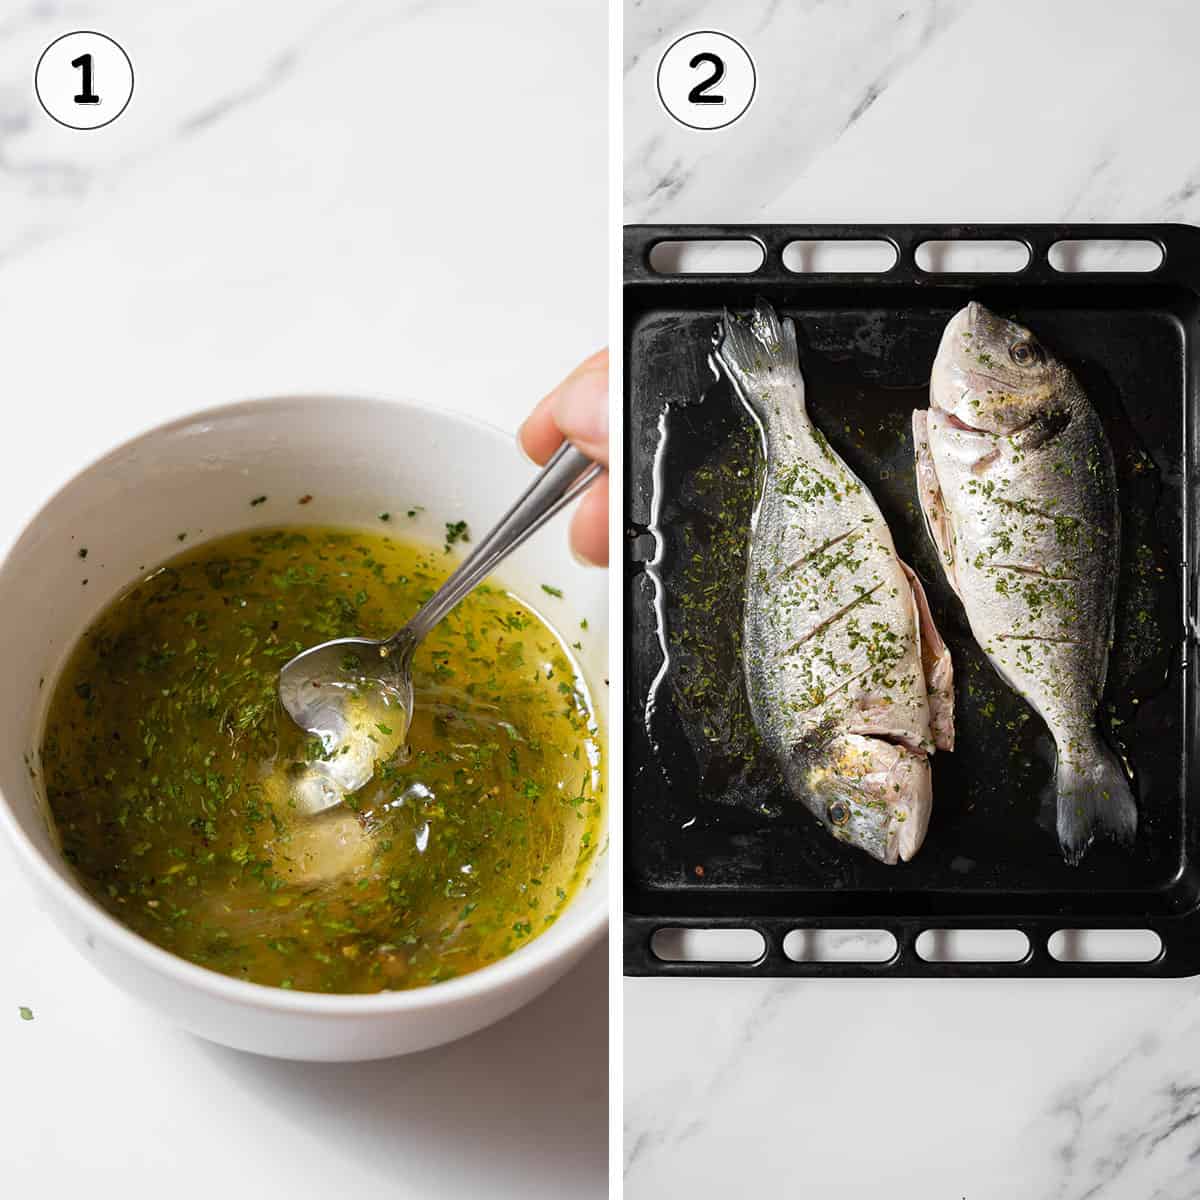 mixing the marinade and pouring it over the bream.